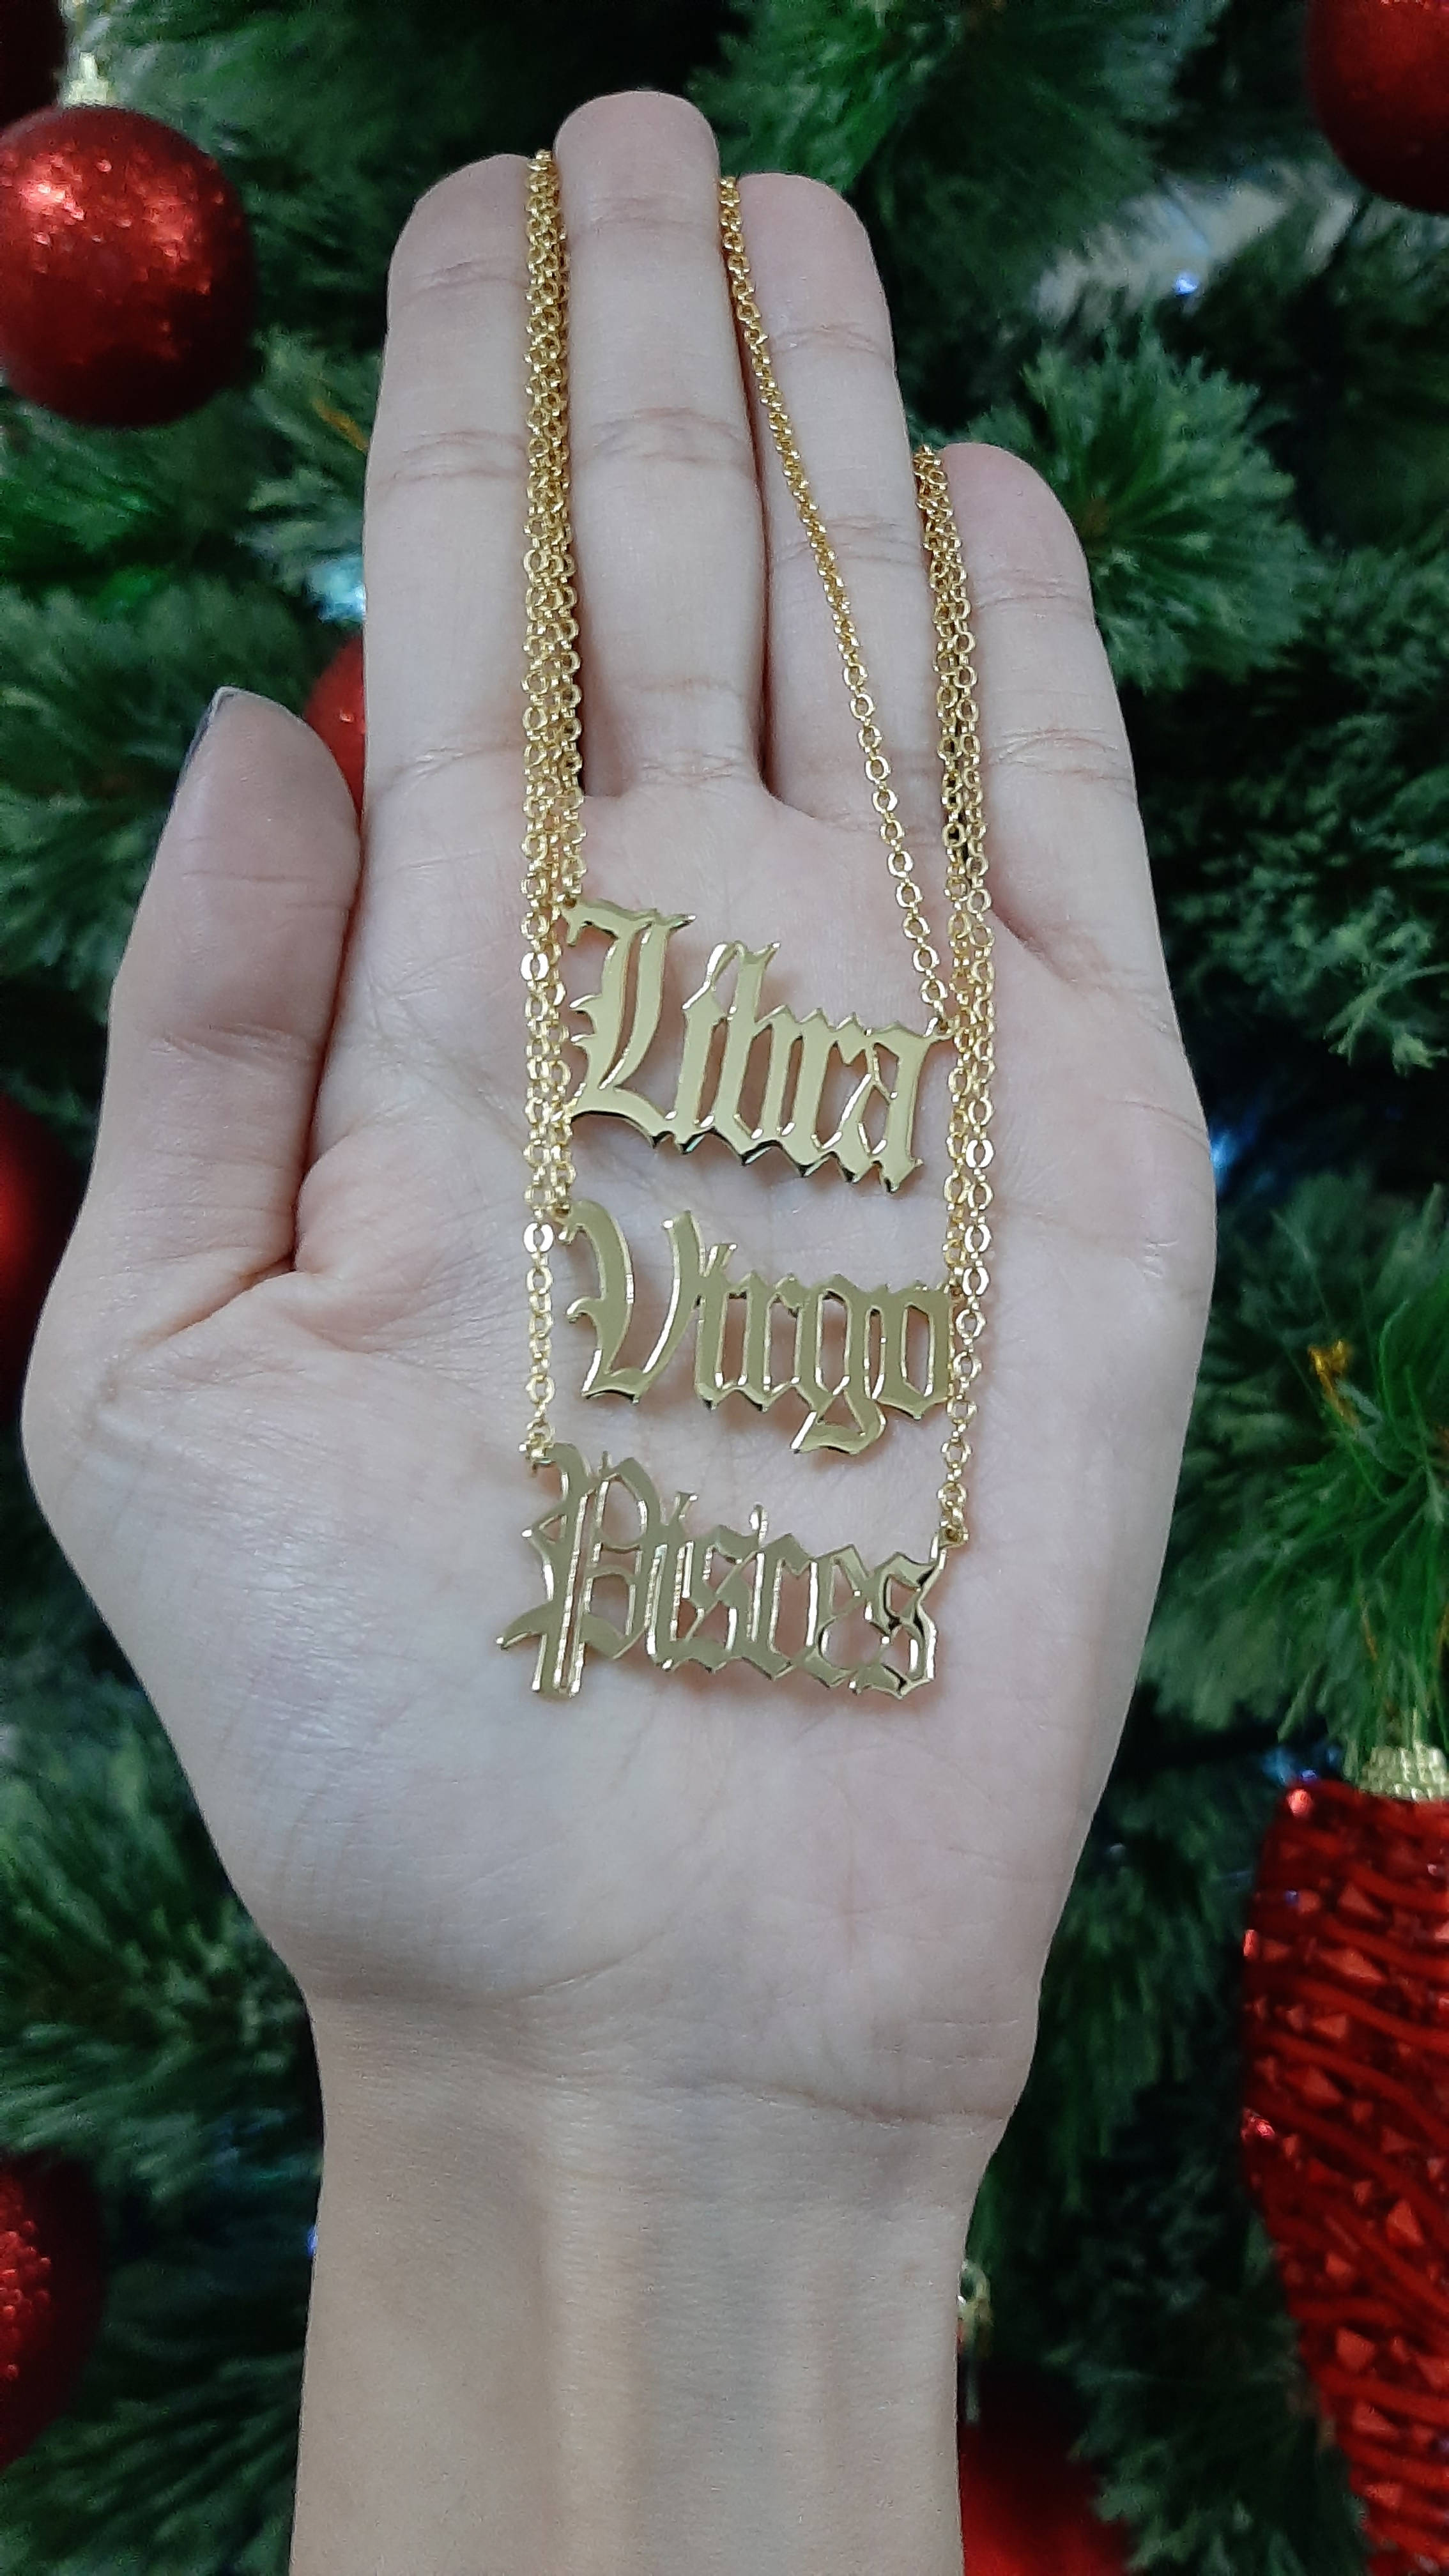 Goldplated name necklace